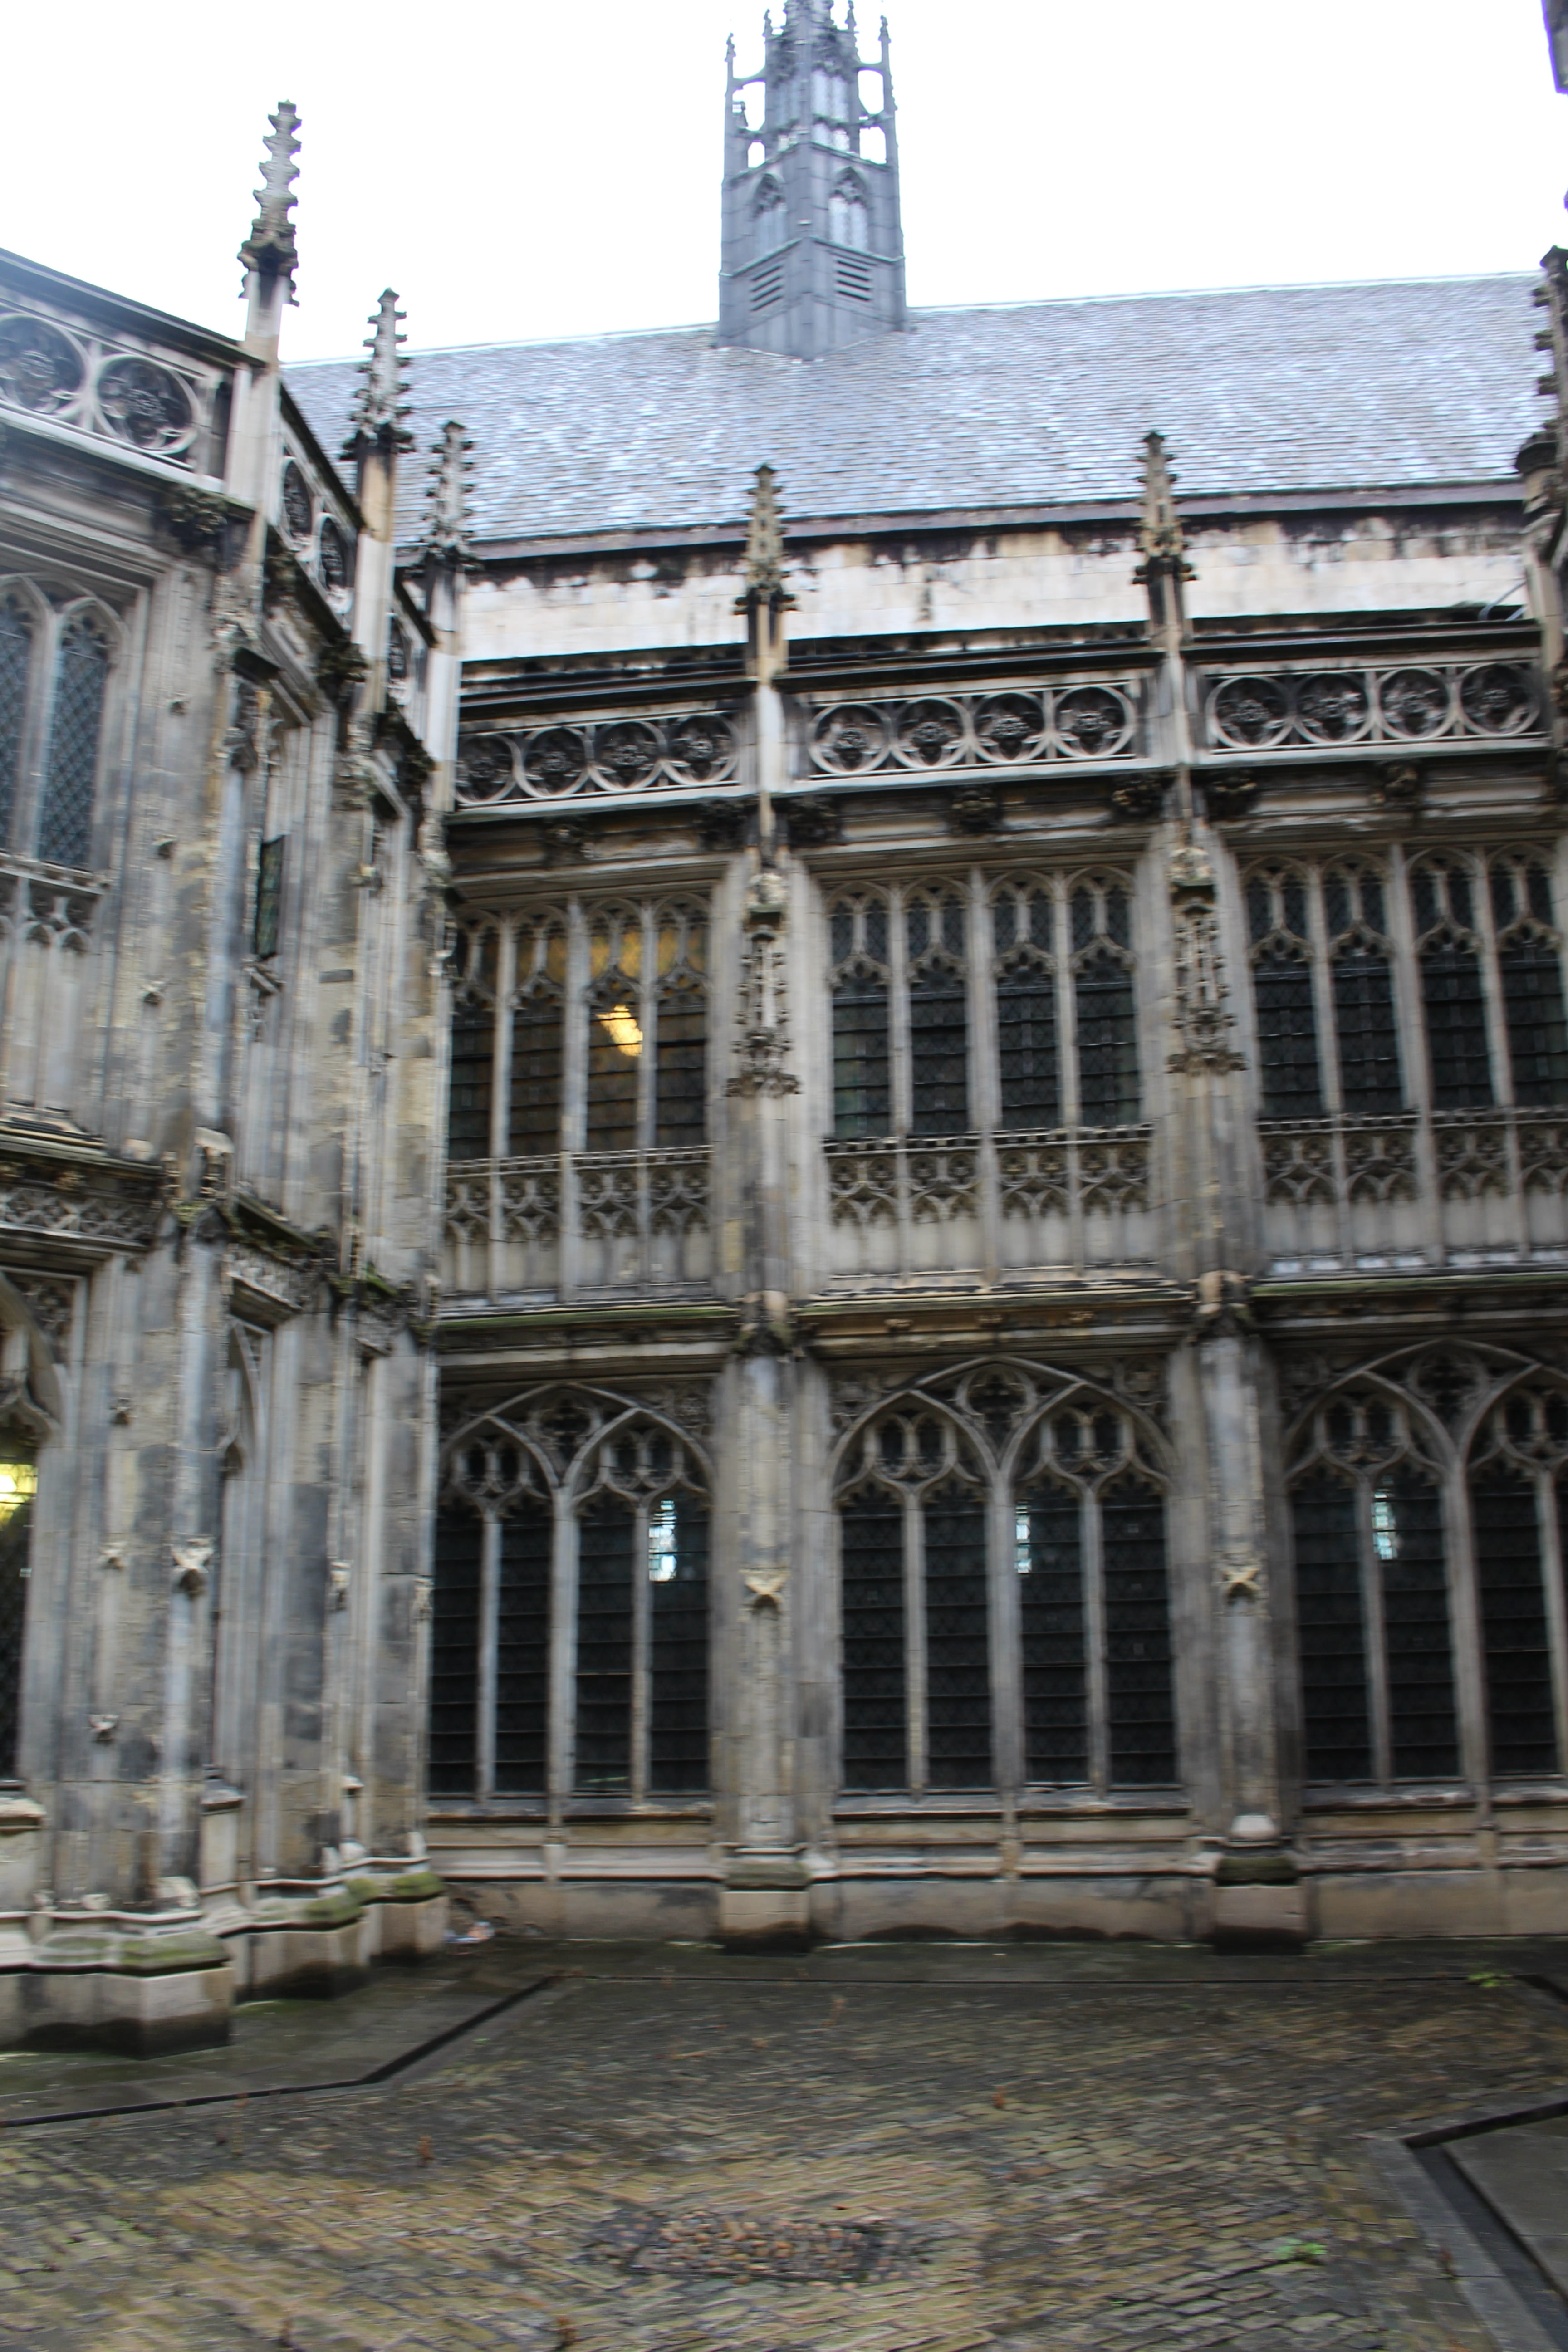 The restored St. Stephen's Cloisters, looking west to Westminster Hall, also part of Richard's repair work at the Palace.